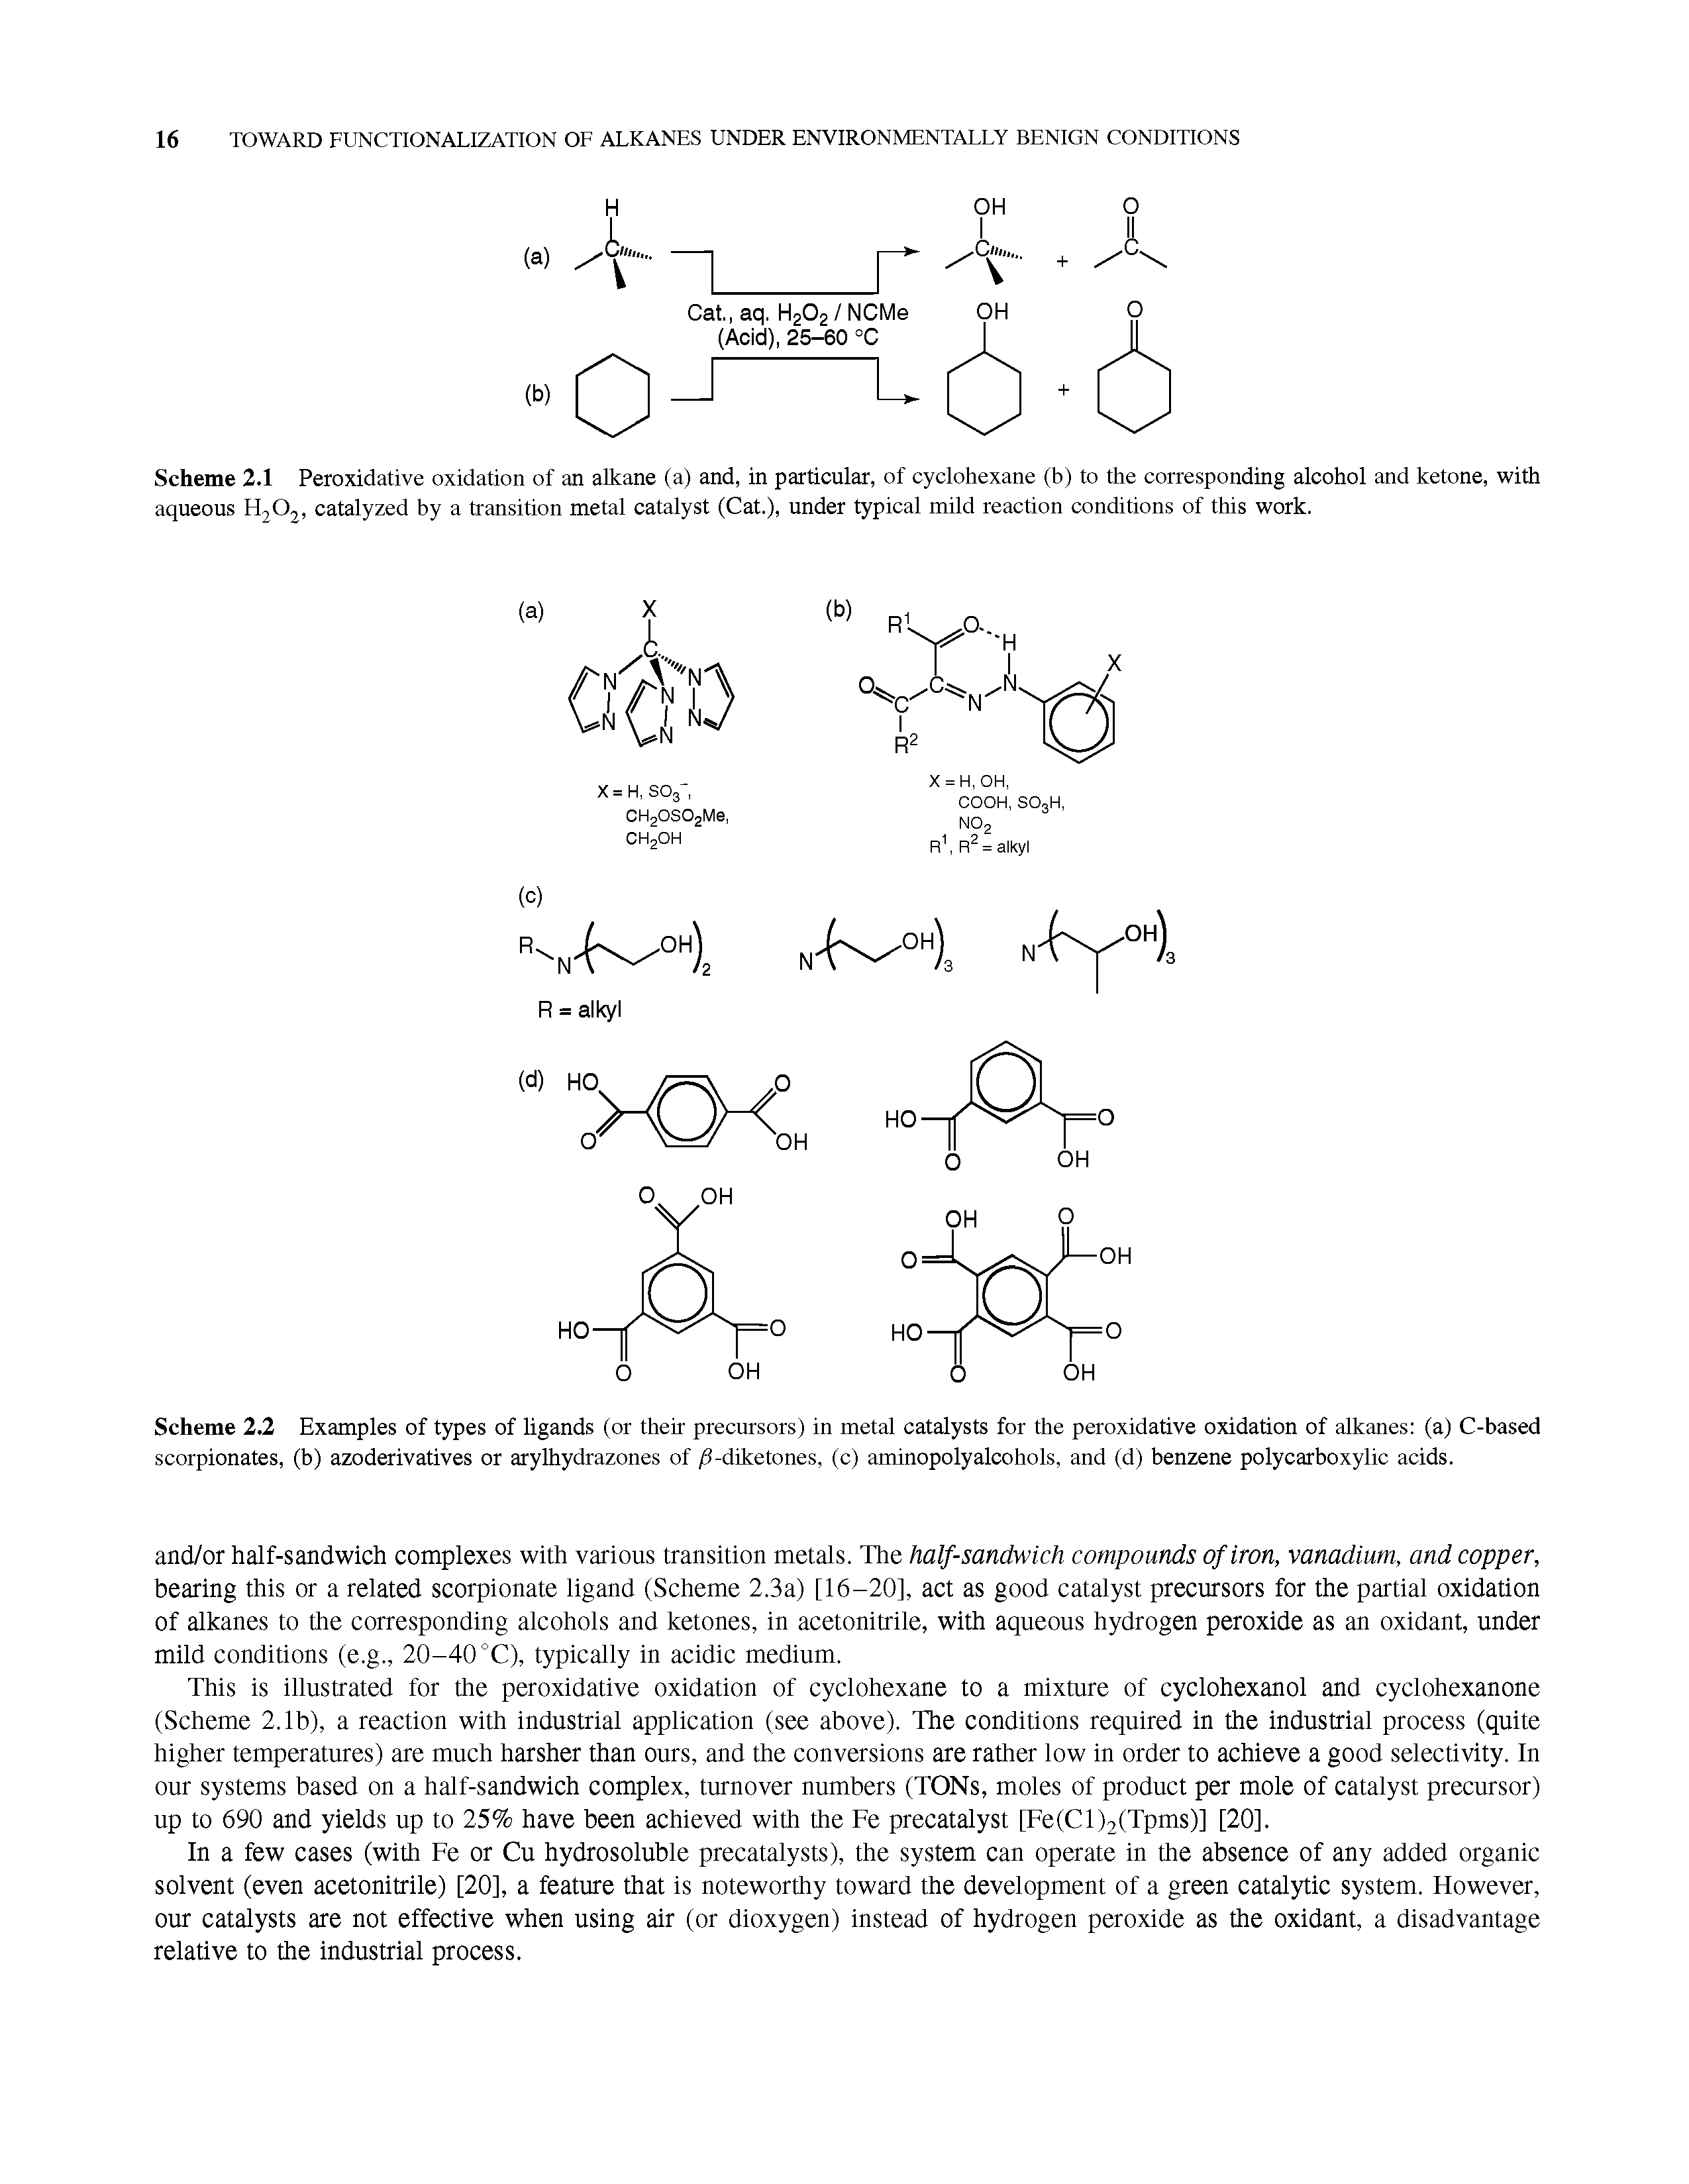 Scheme 2.2 Examples of types of ligands (or their precursors) in metal catalysts for the peroxidative oxidation of alkanes (a) C-based scorpionates, (b) azoderivatives or arylhydrazones of /S-diketones, (c) aminopolyalcohols, and (d) benzene polycarboxylic acids.